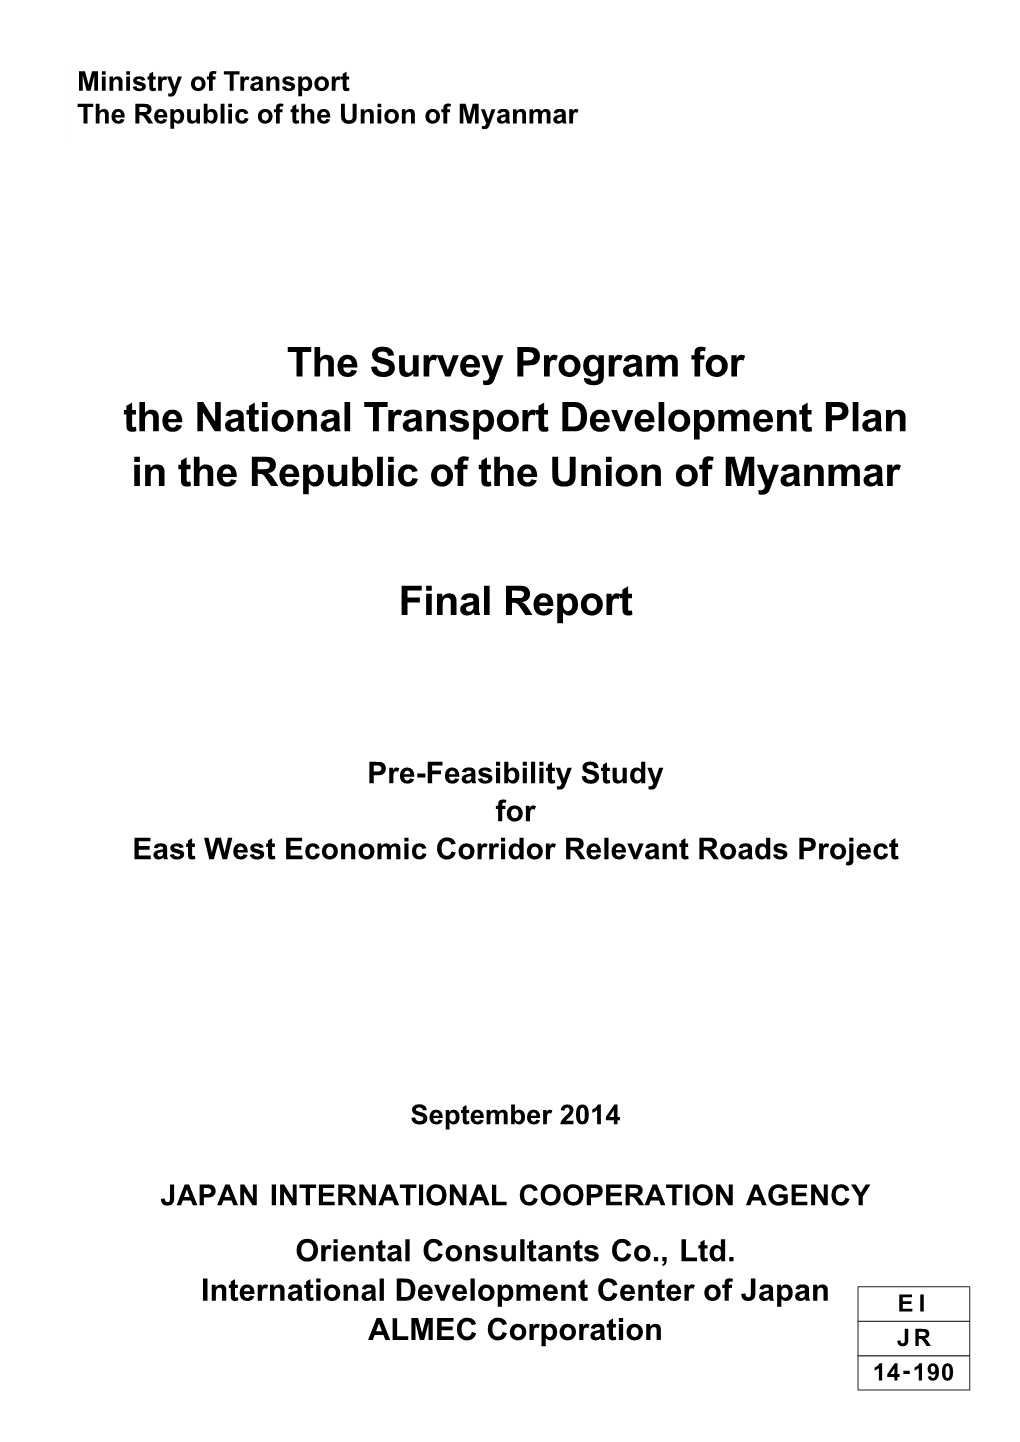 The Survey Program for the National Transport Development Plan in the Republic of the Union of Myanmar